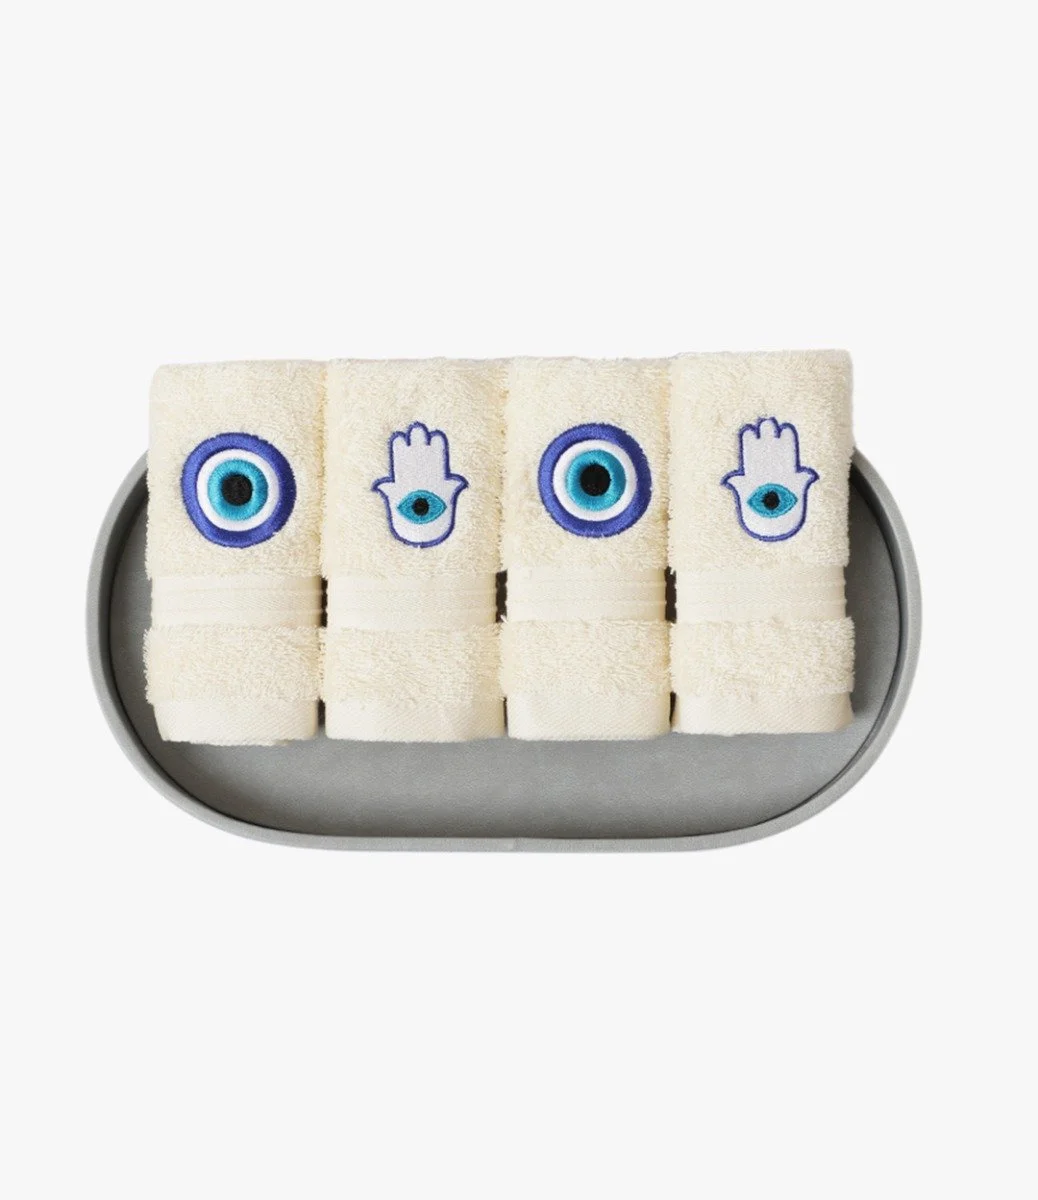 Evil Eye Towel Set of 4 - Cream by Lumiere Co